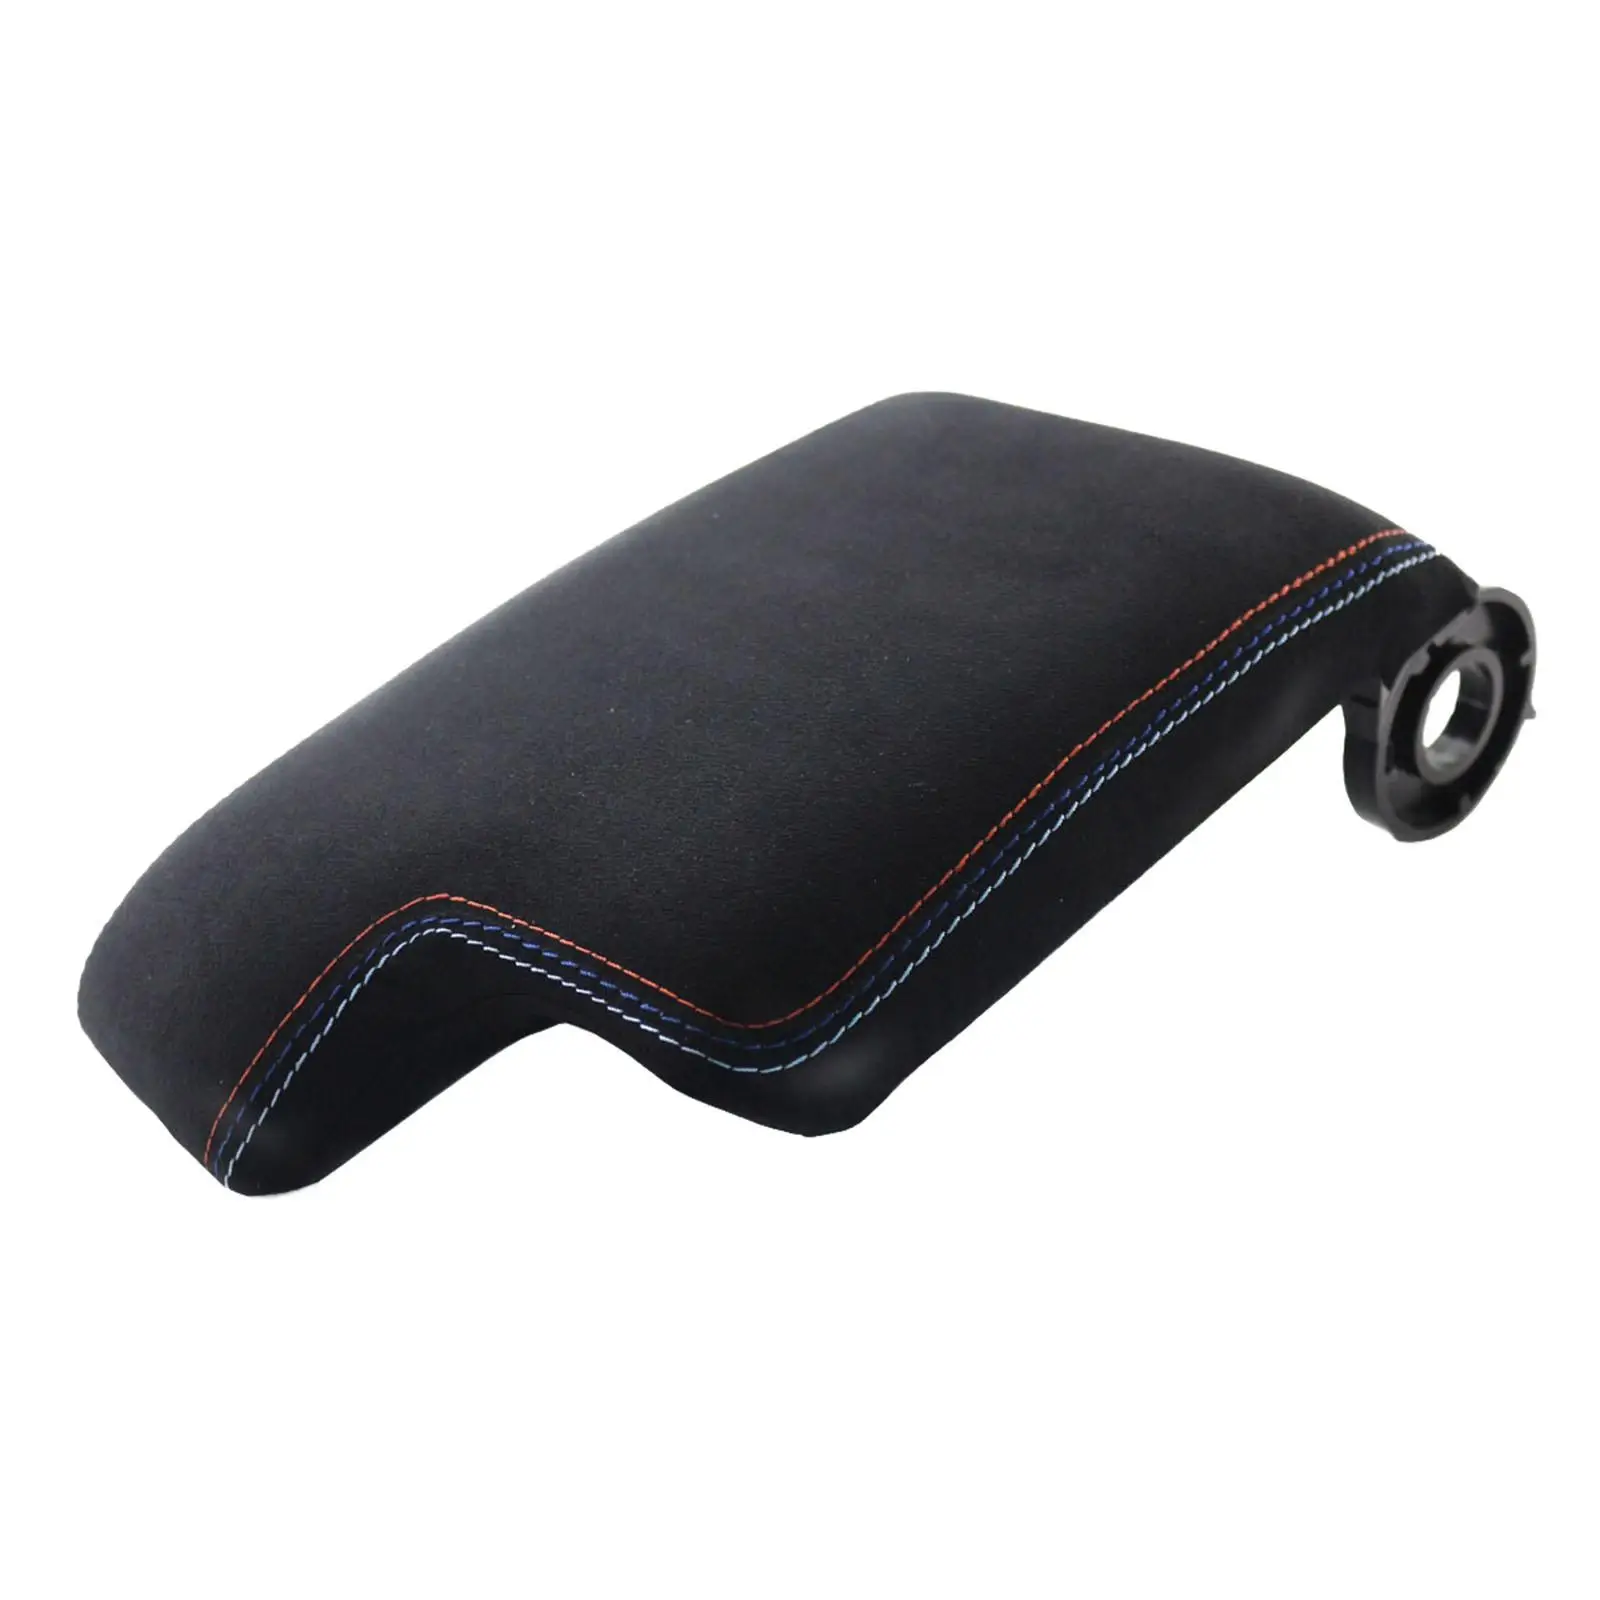 Vehicle Center Console Armrest Cover Replacement Waterproof Synthetic Leather Protector Pad Fit for BMW E46 99-04